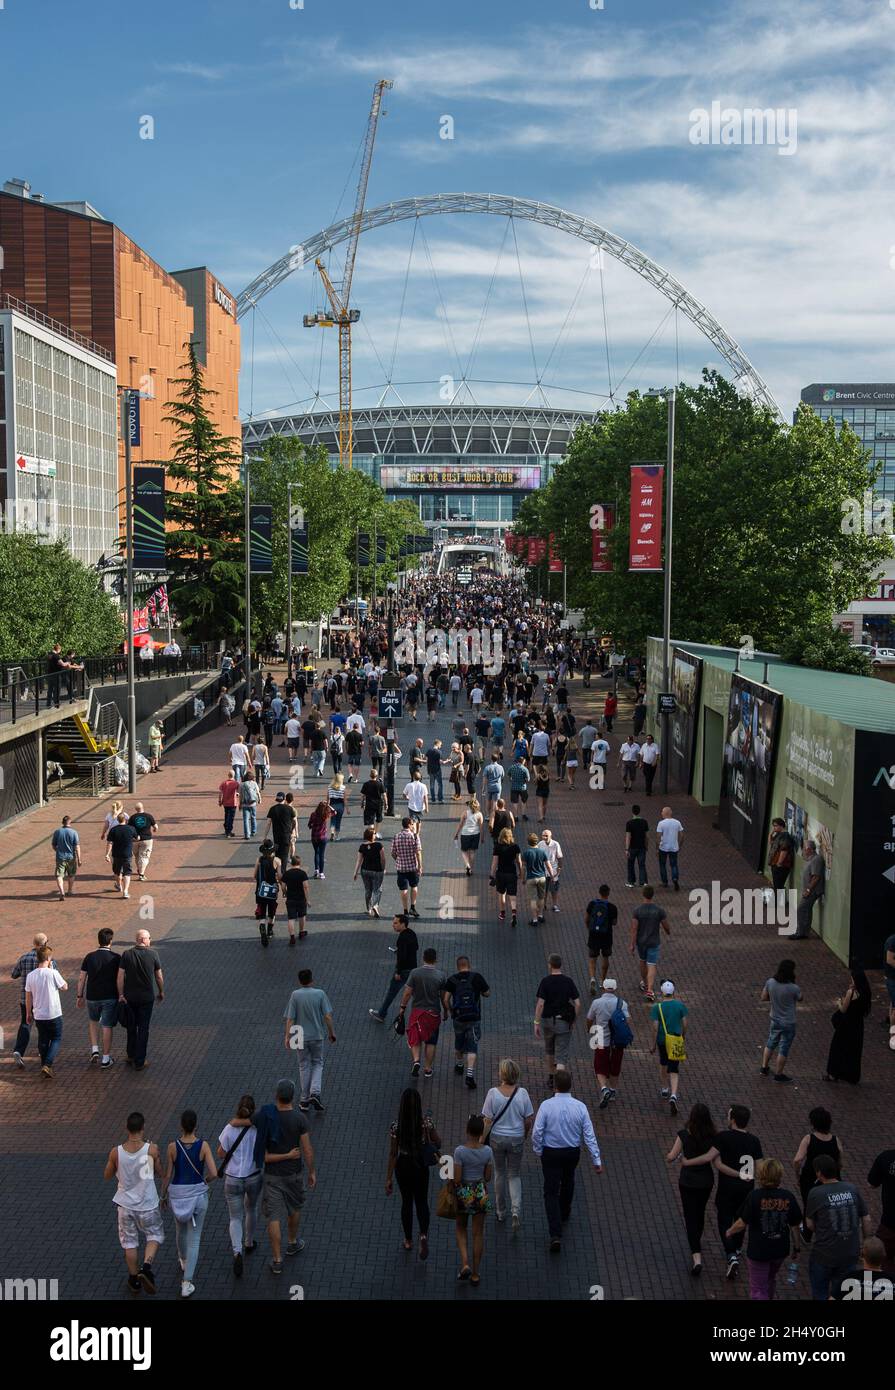 The crowd arriving at AC/DC concert at Wembley Stadium on July 04, 2015 in London, United Kingdom Stock Photo